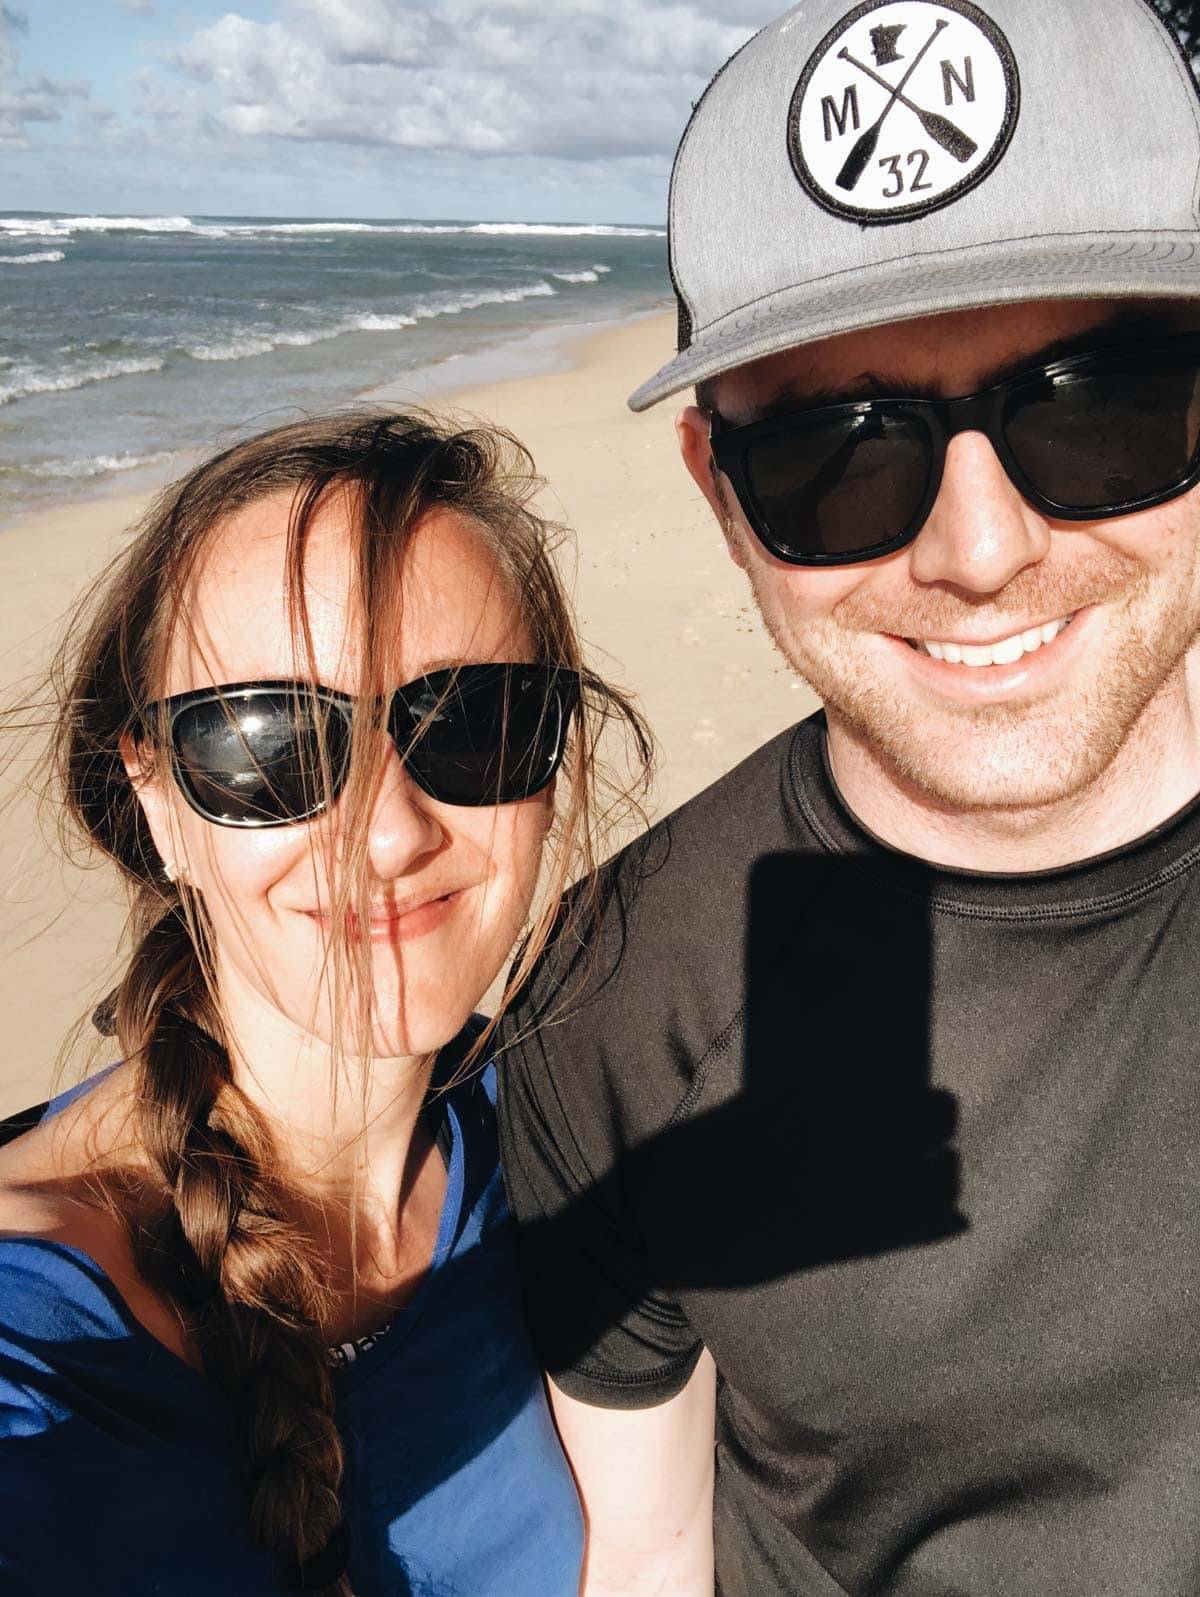 Woman and man wearing sunglasses on the beach.